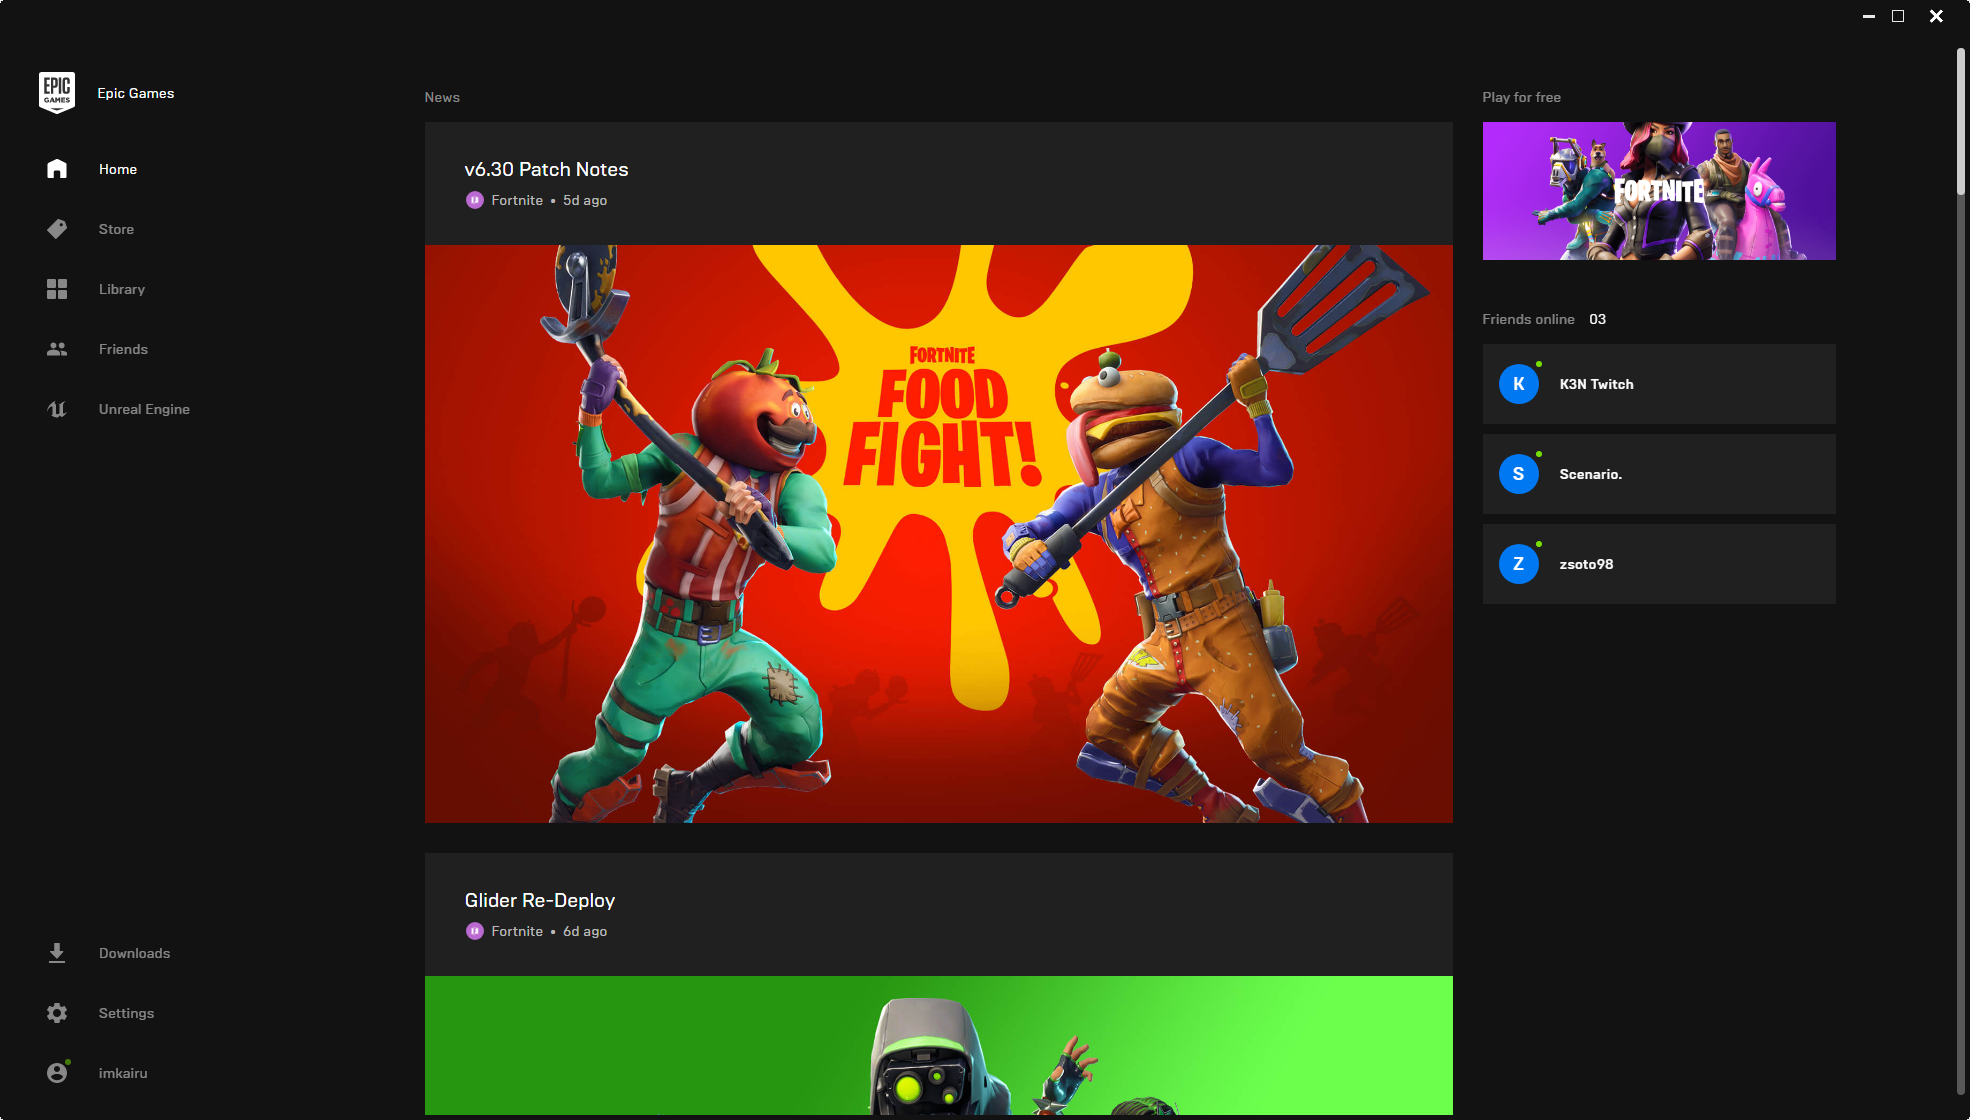 This is how the Epic Games Launcher looked back in 2018. : r